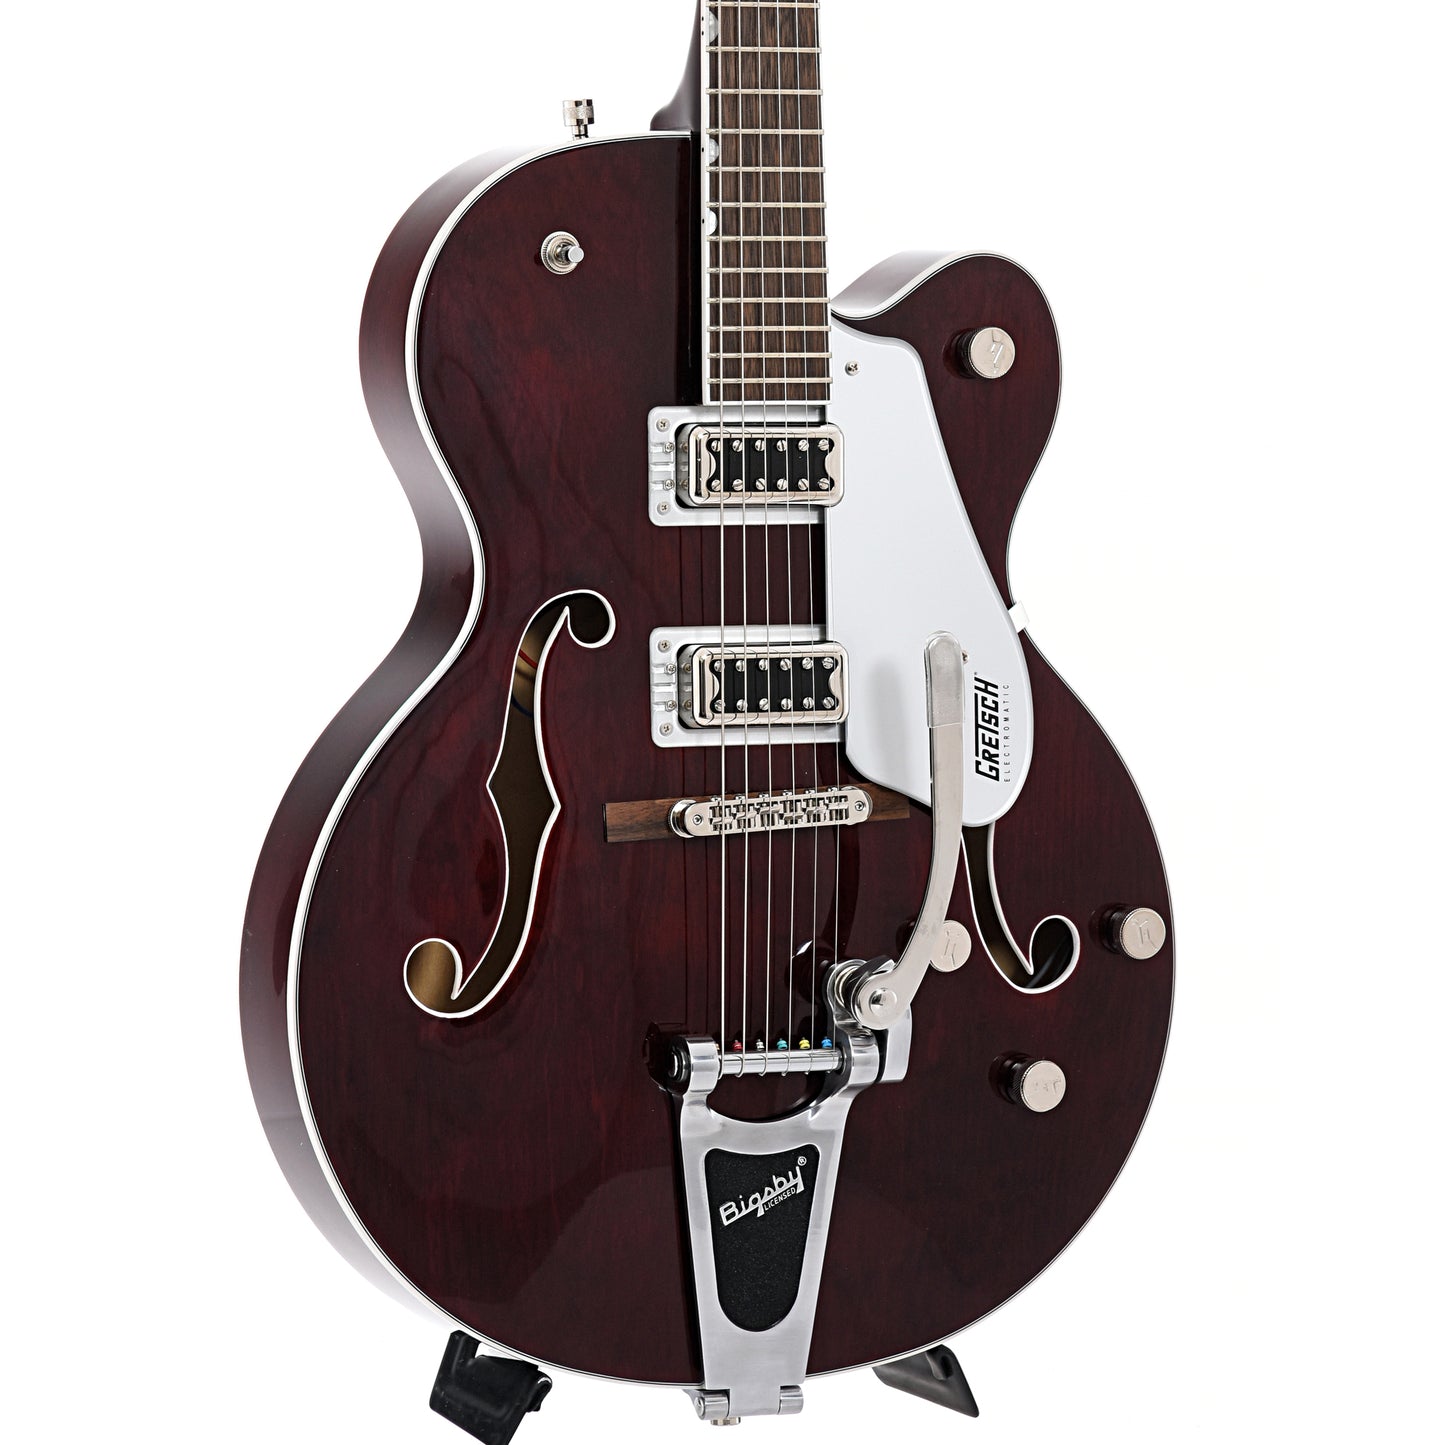 Image 3 of Gretsch G5420T Electromatic Classic Hollow Body Single Cut with Bigbsy, Walnut Stain- SKU# G5420T-WLNT : Product Type Hollow Body Electric Guitars : Elderly Instruments